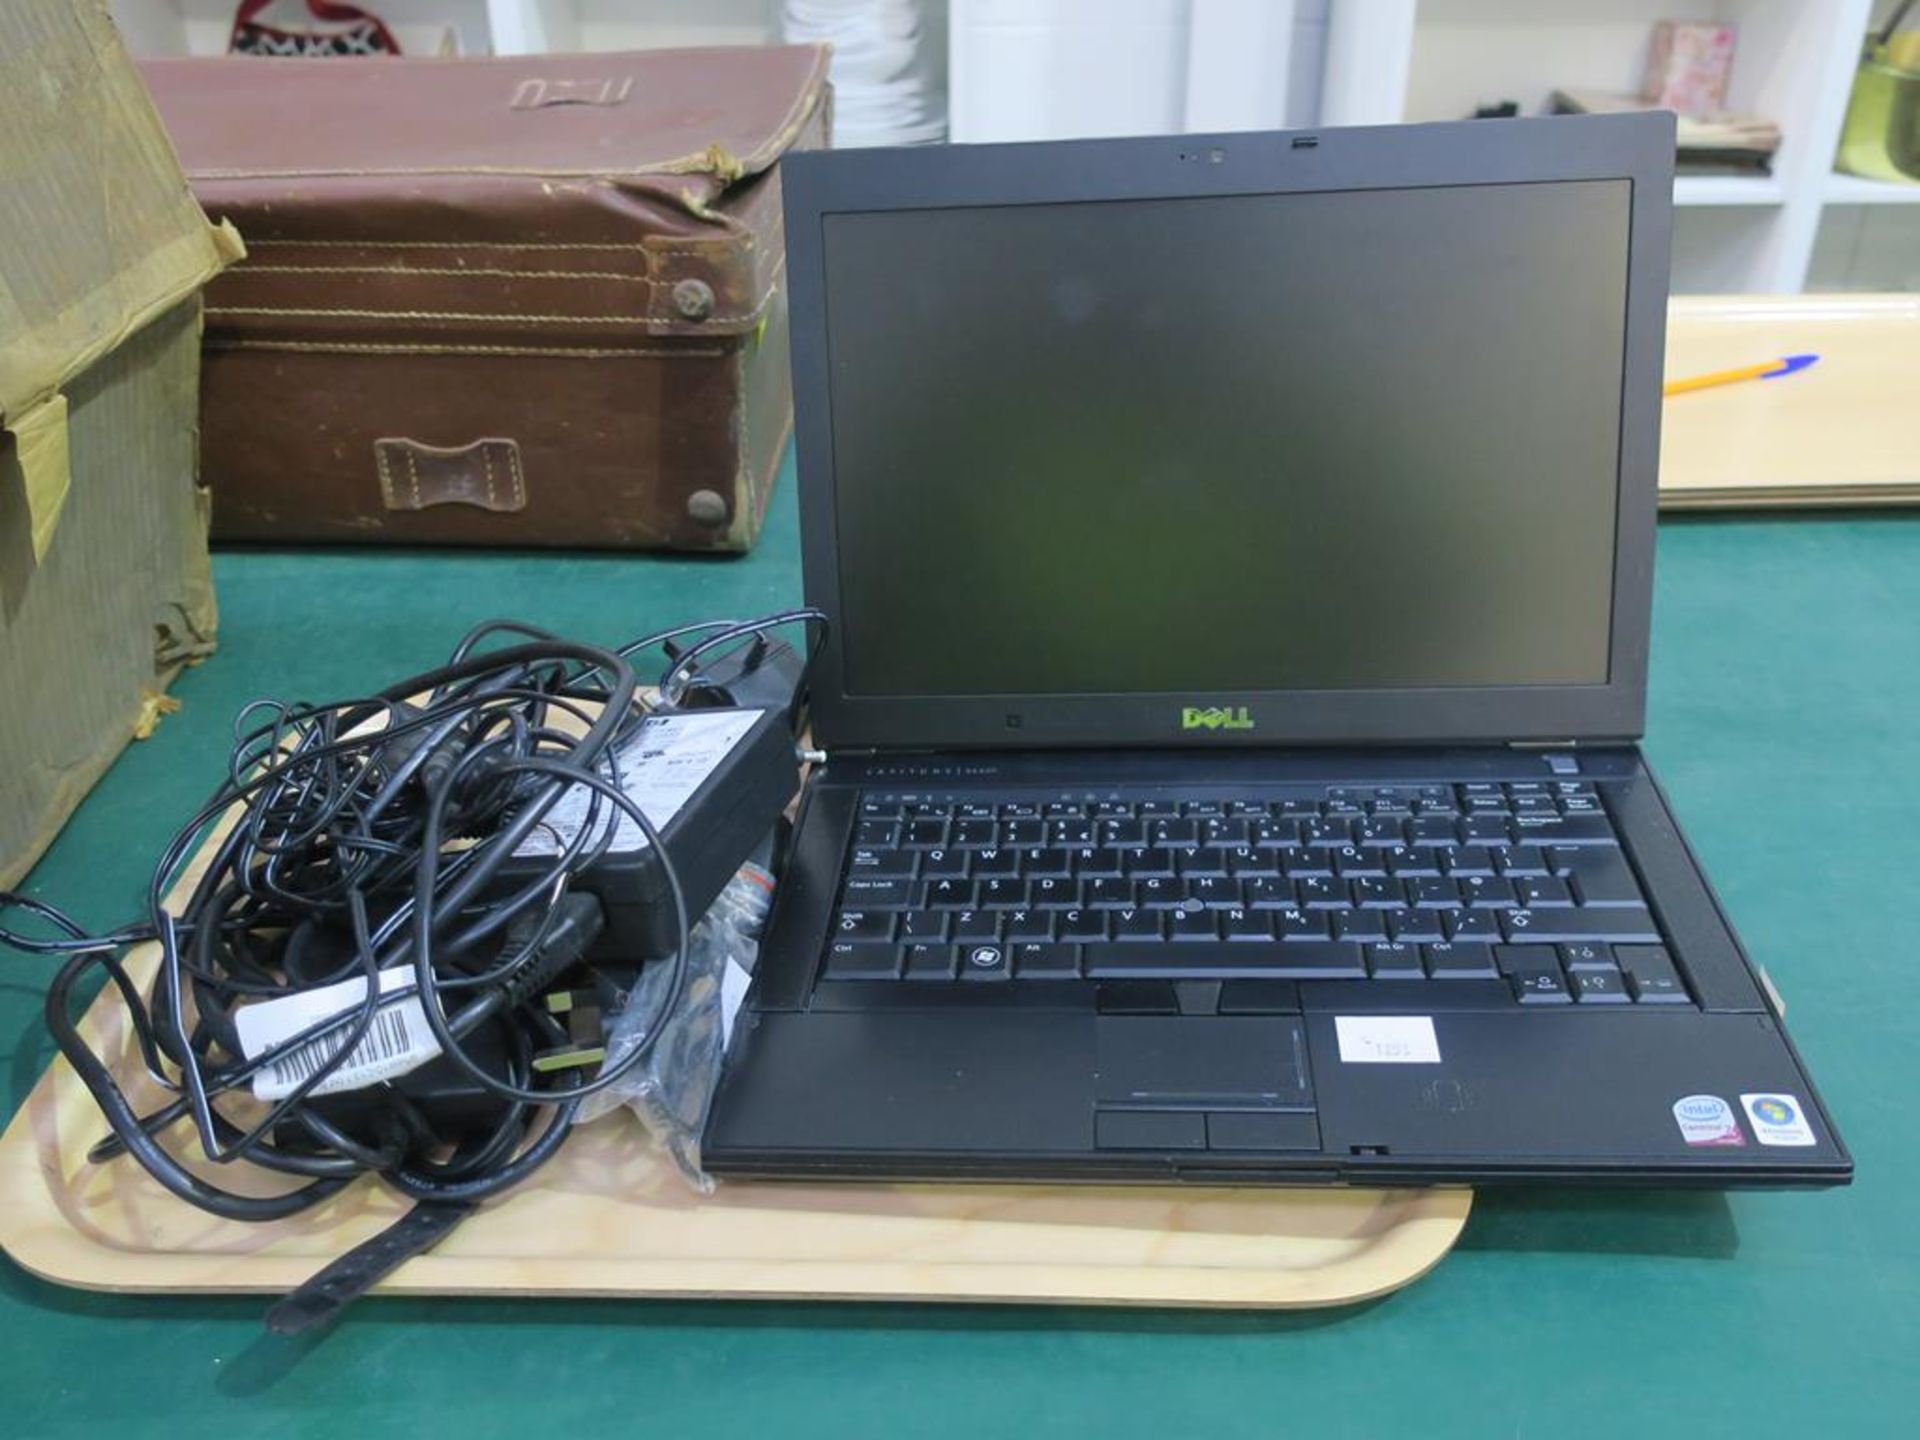 Dell Latitude E6400 Laptop with Mouse and Charger (est £30-£50) - Image 2 of 8